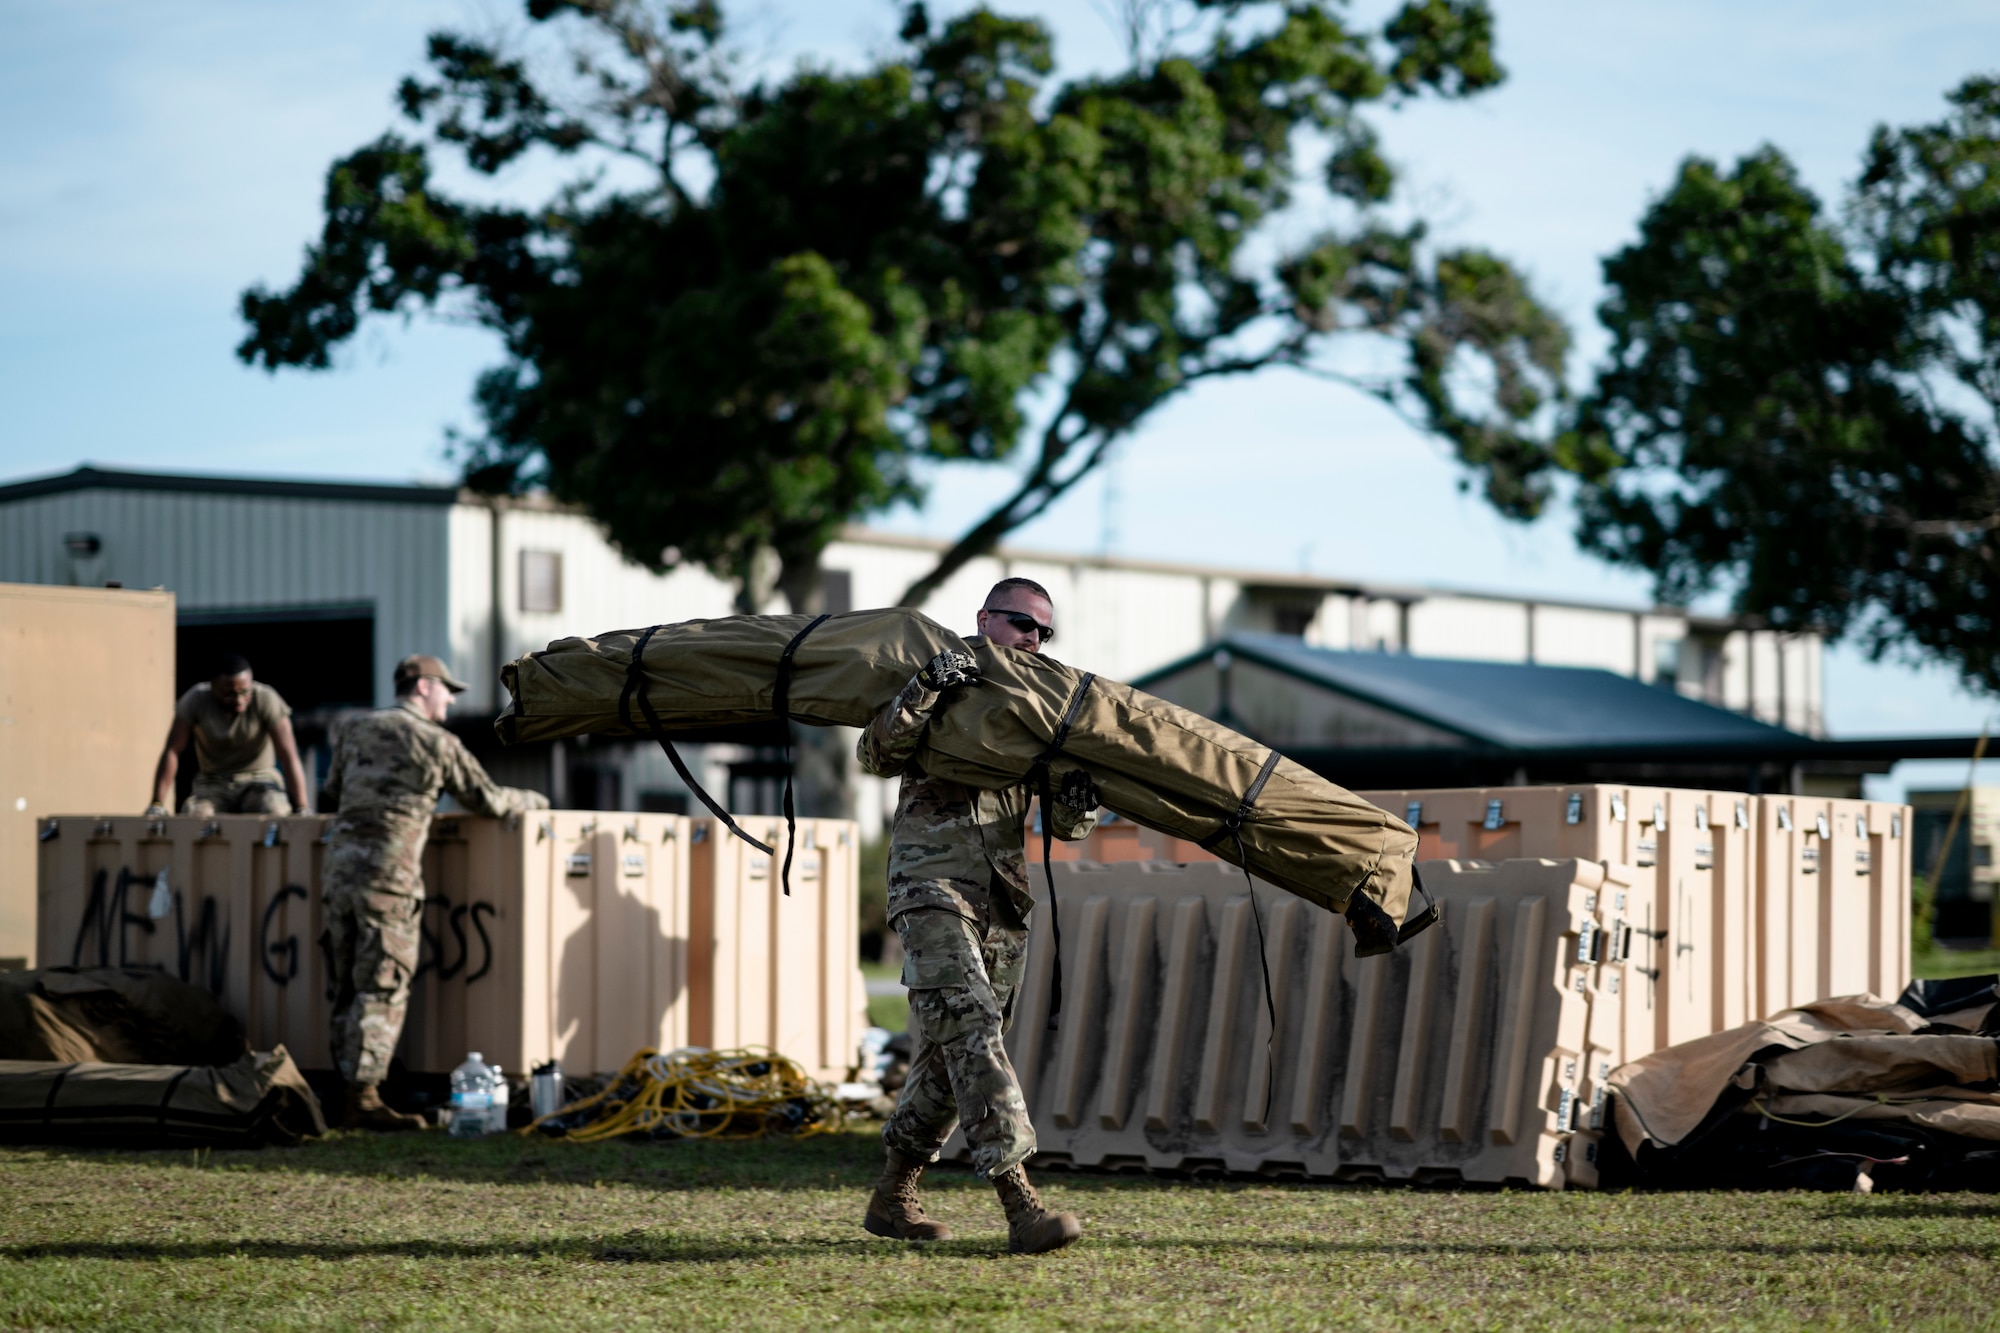 U.S. Air Force Airmen assigned to various units from Moody Air Force Base, Georgia, unload tent equipment from crates at Avon Park Air Force Range, Florida, April 8, 2024. The 23rd Civil Engineer Squadron solicited help from Airmen in various career fields to establish shelters for the exercise. Built upon Air Combat Command's directive to assert air power in contested environments, exercise Ready Tiger 24-1 aims to test and enhance the 23rd Wing’s proficiency in executing Lead Wing and expeditionary air base concepts through Agile Combat Employment and command and control operations. (U.S. Air Force photo by Tech. Sgt. Devin Boyer)